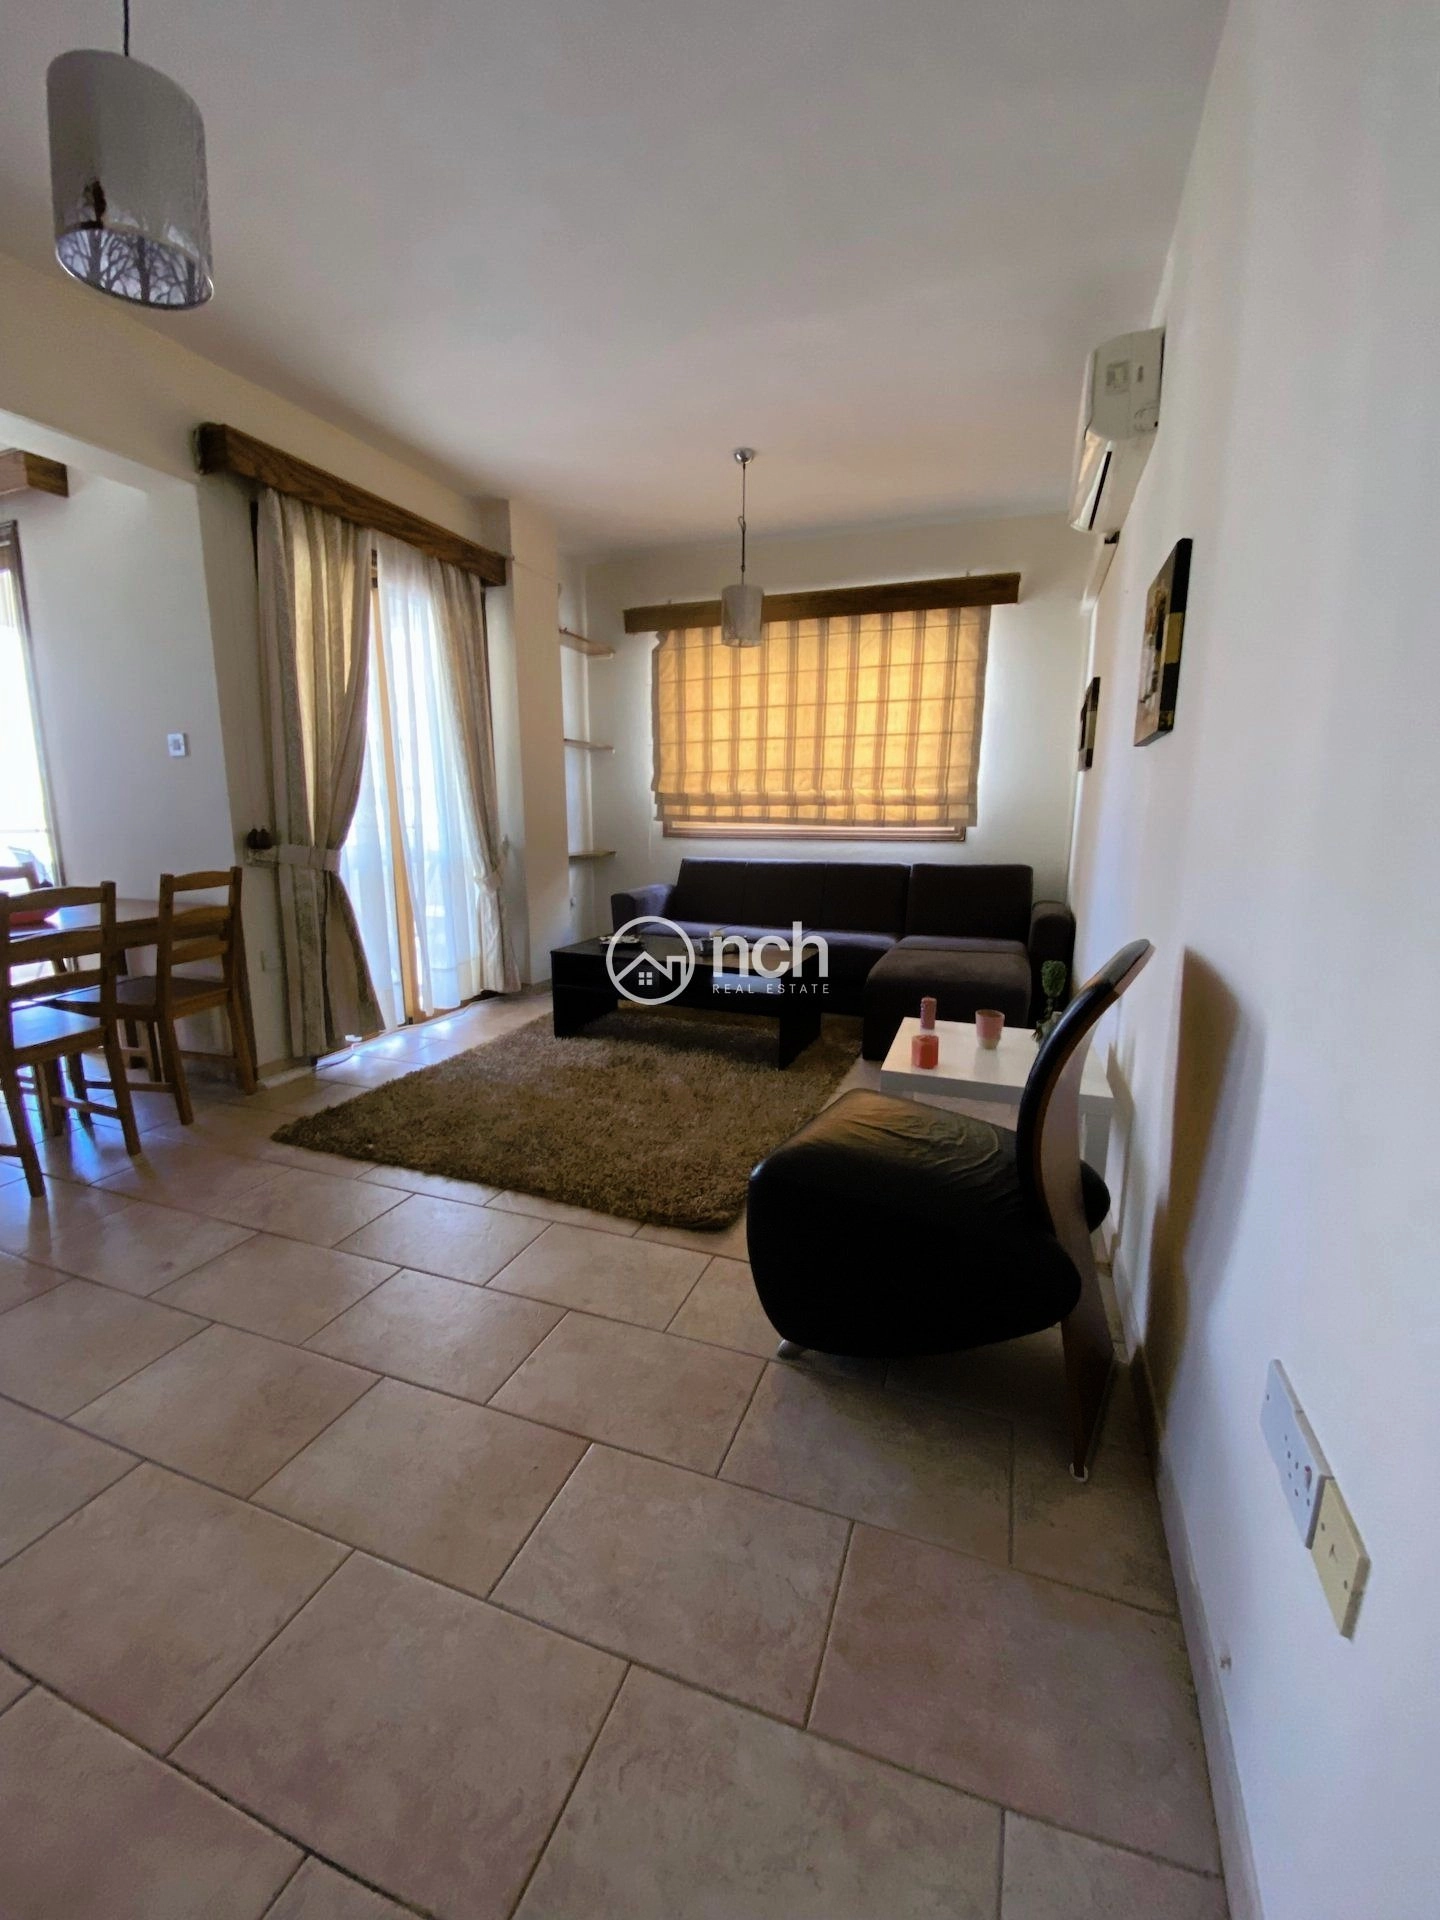 2 Bedroom Apartment for Rent in Strovolos – Acropolis, Nicosia District